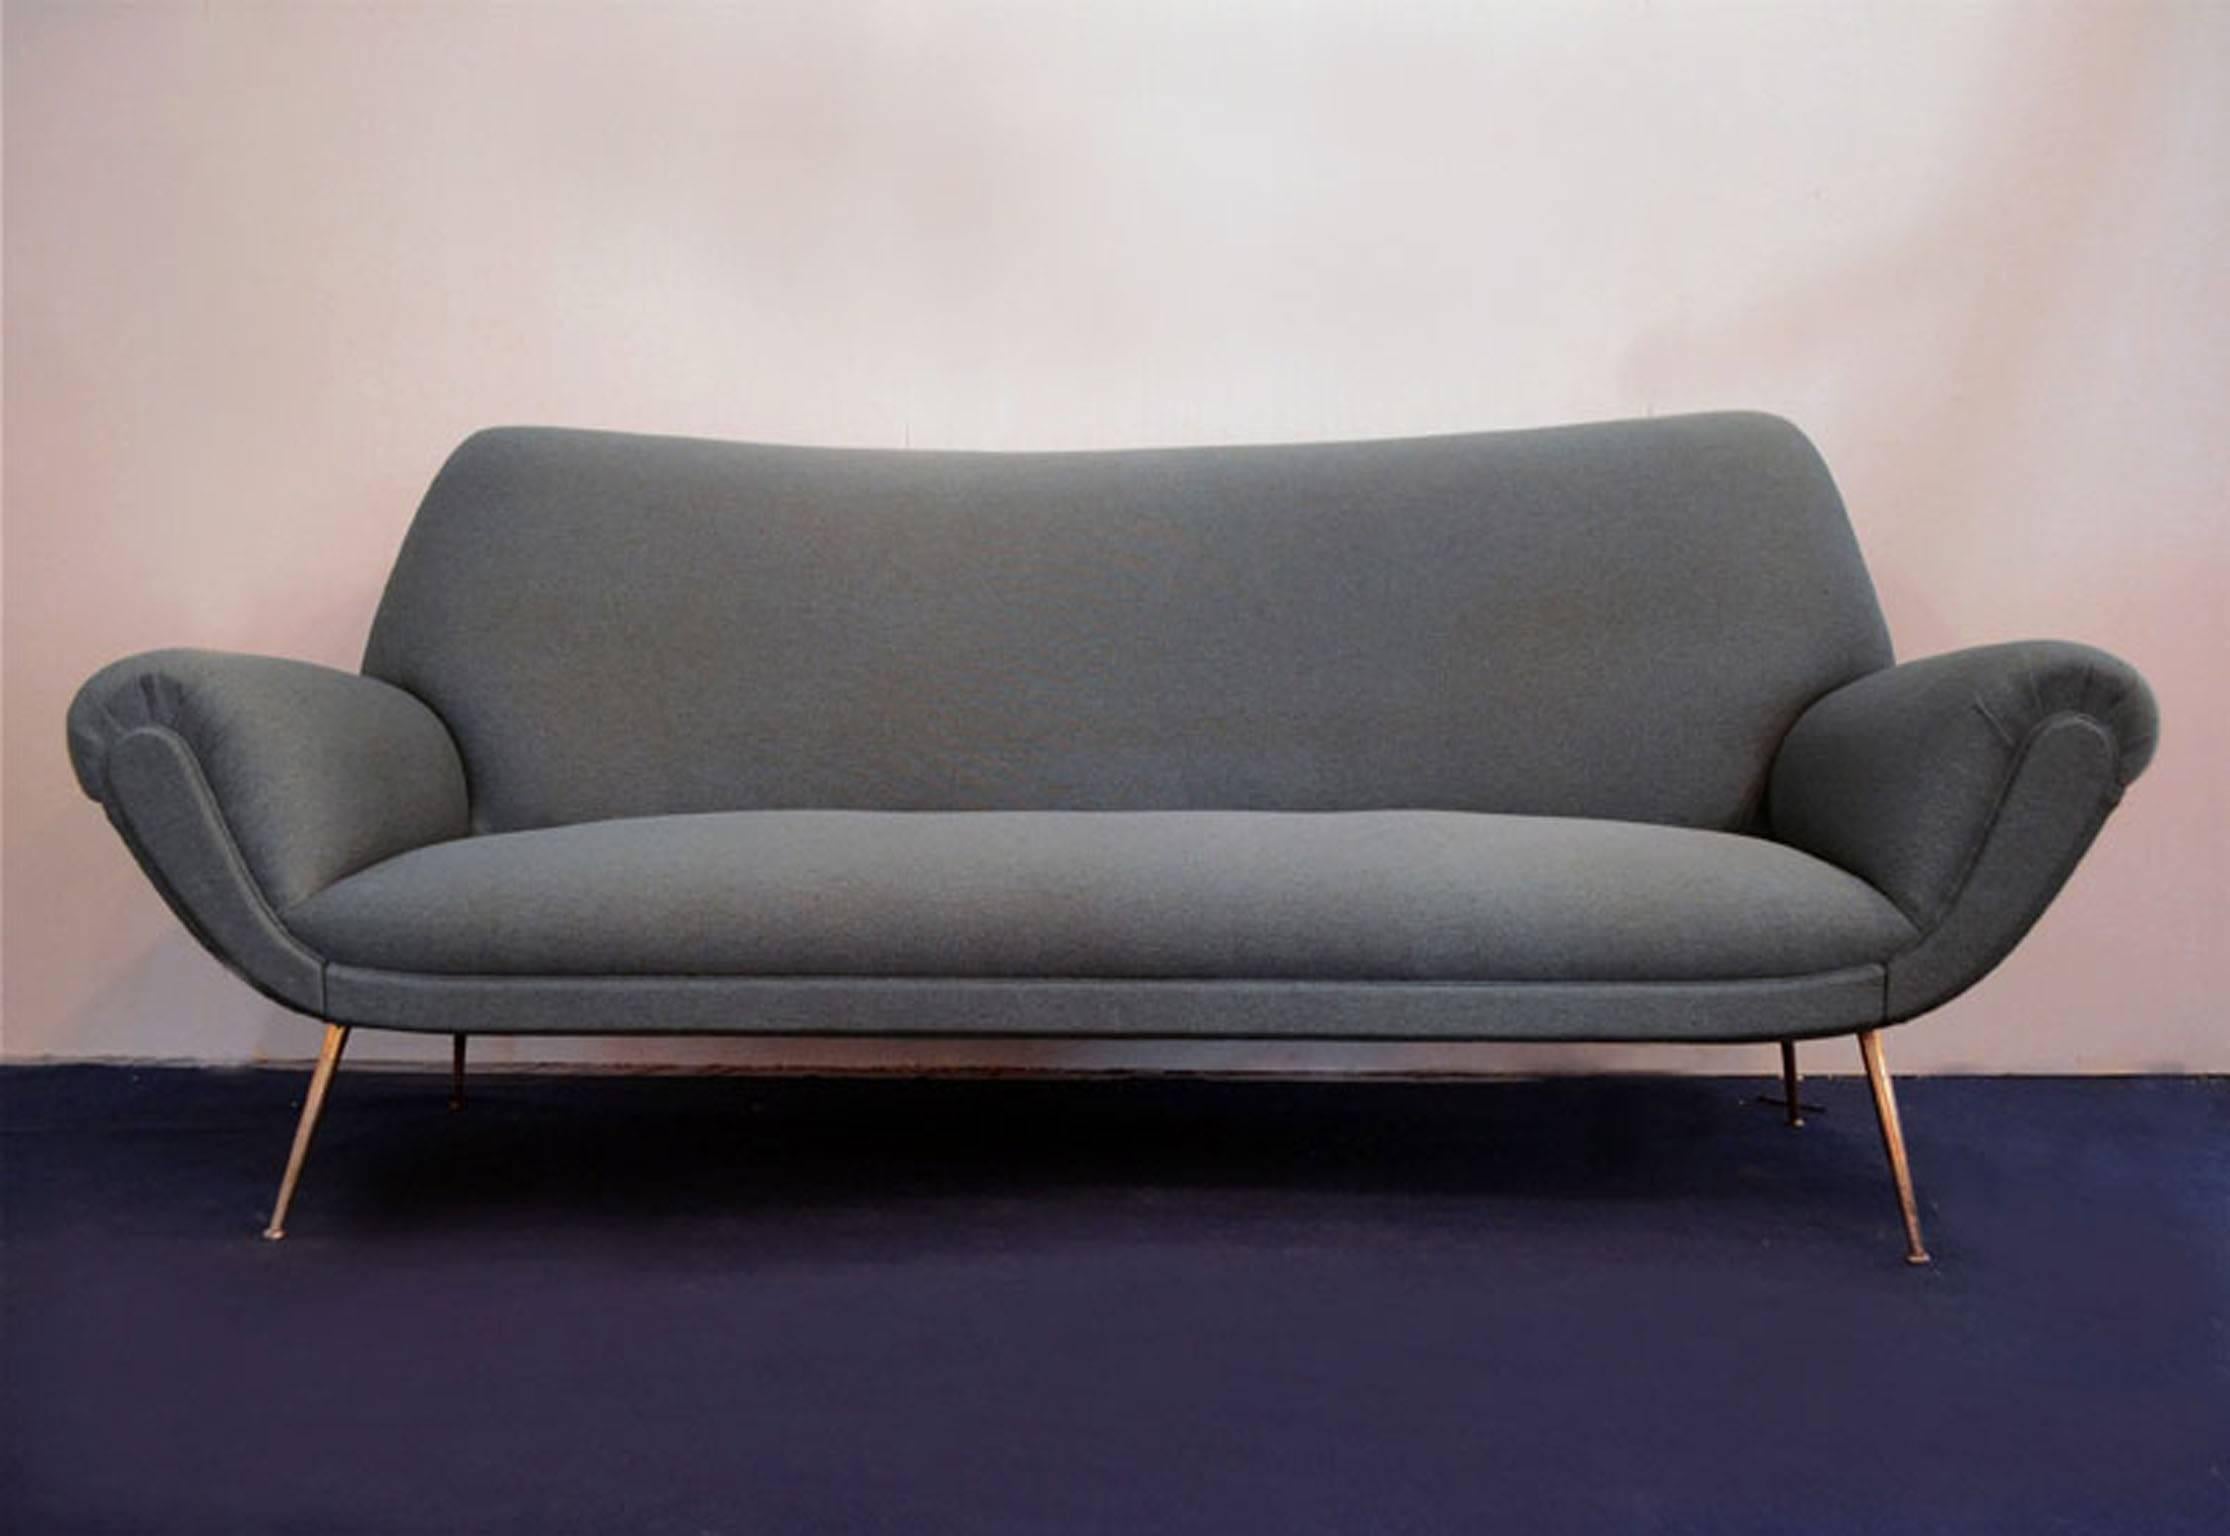 1950s sofa produced by ISA Bergamo. With particular convex back.
With perfectly restored upholstery and coverage.

                         